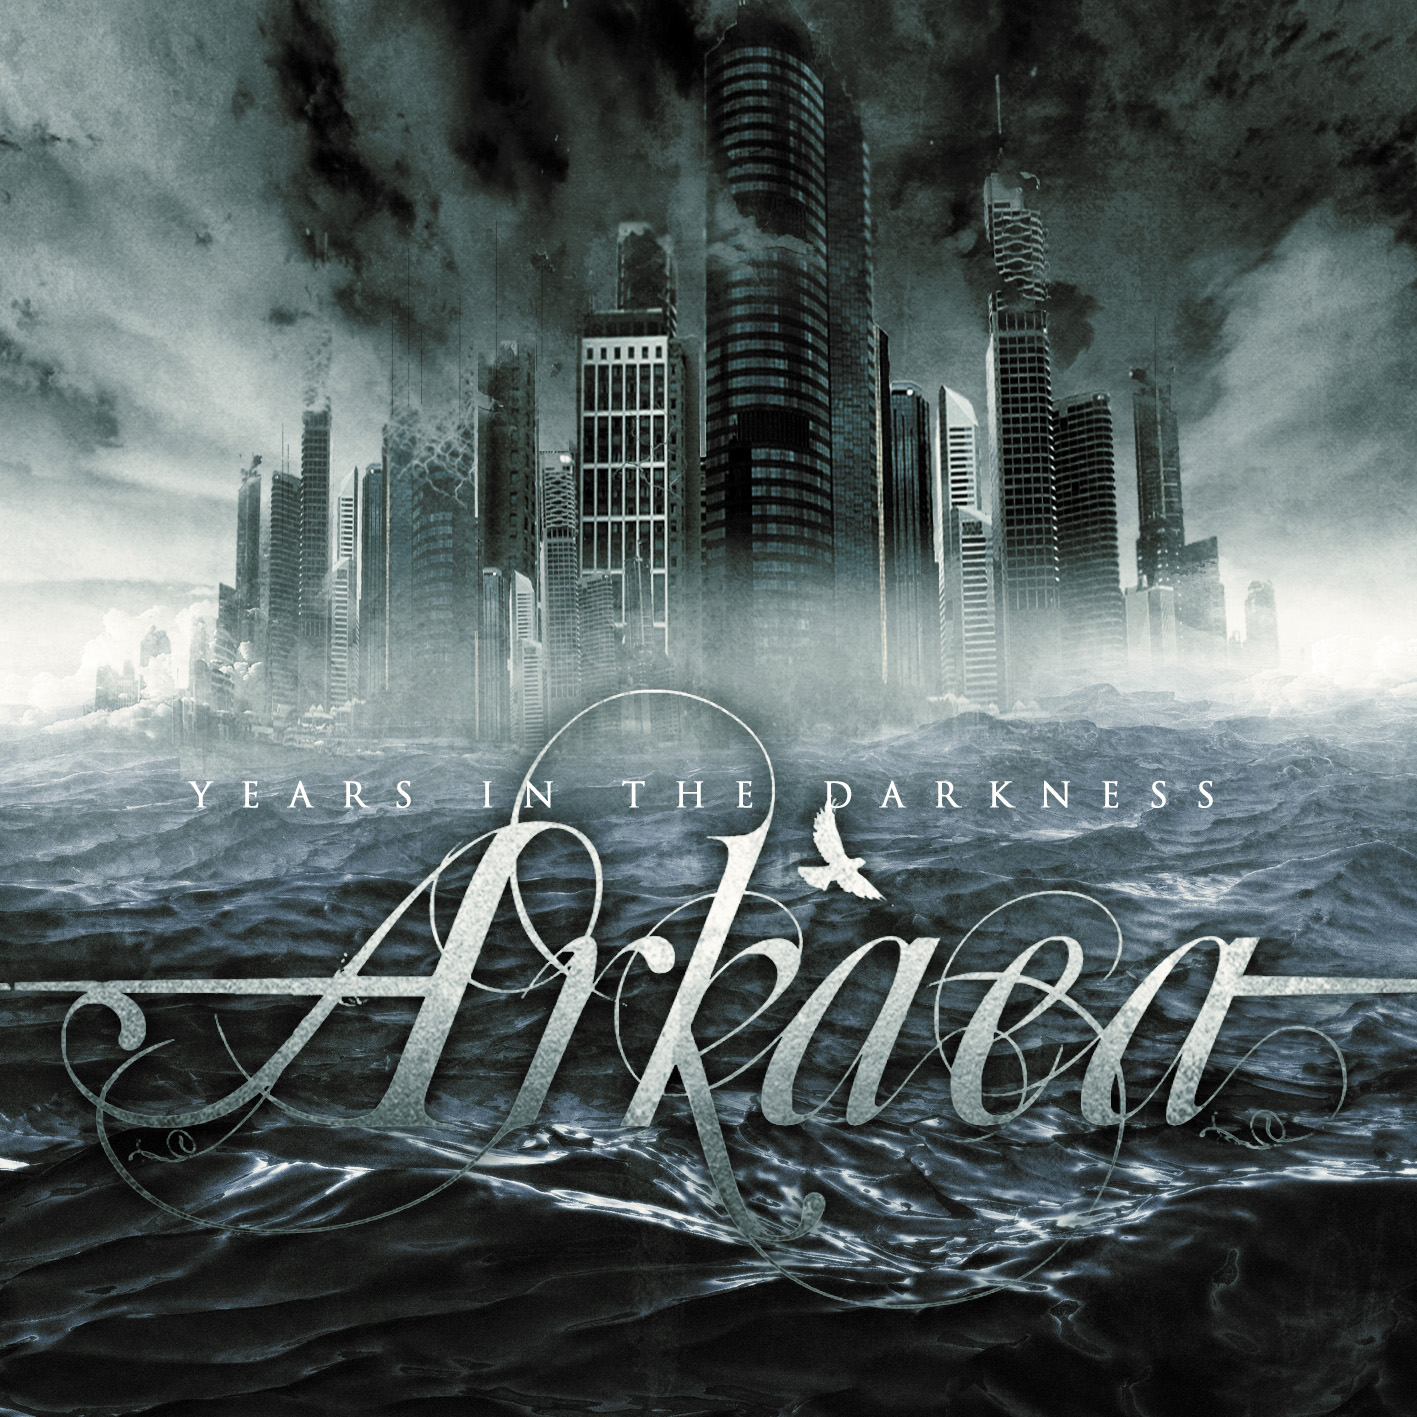 Reseña Years in the Darkness – Arkaea